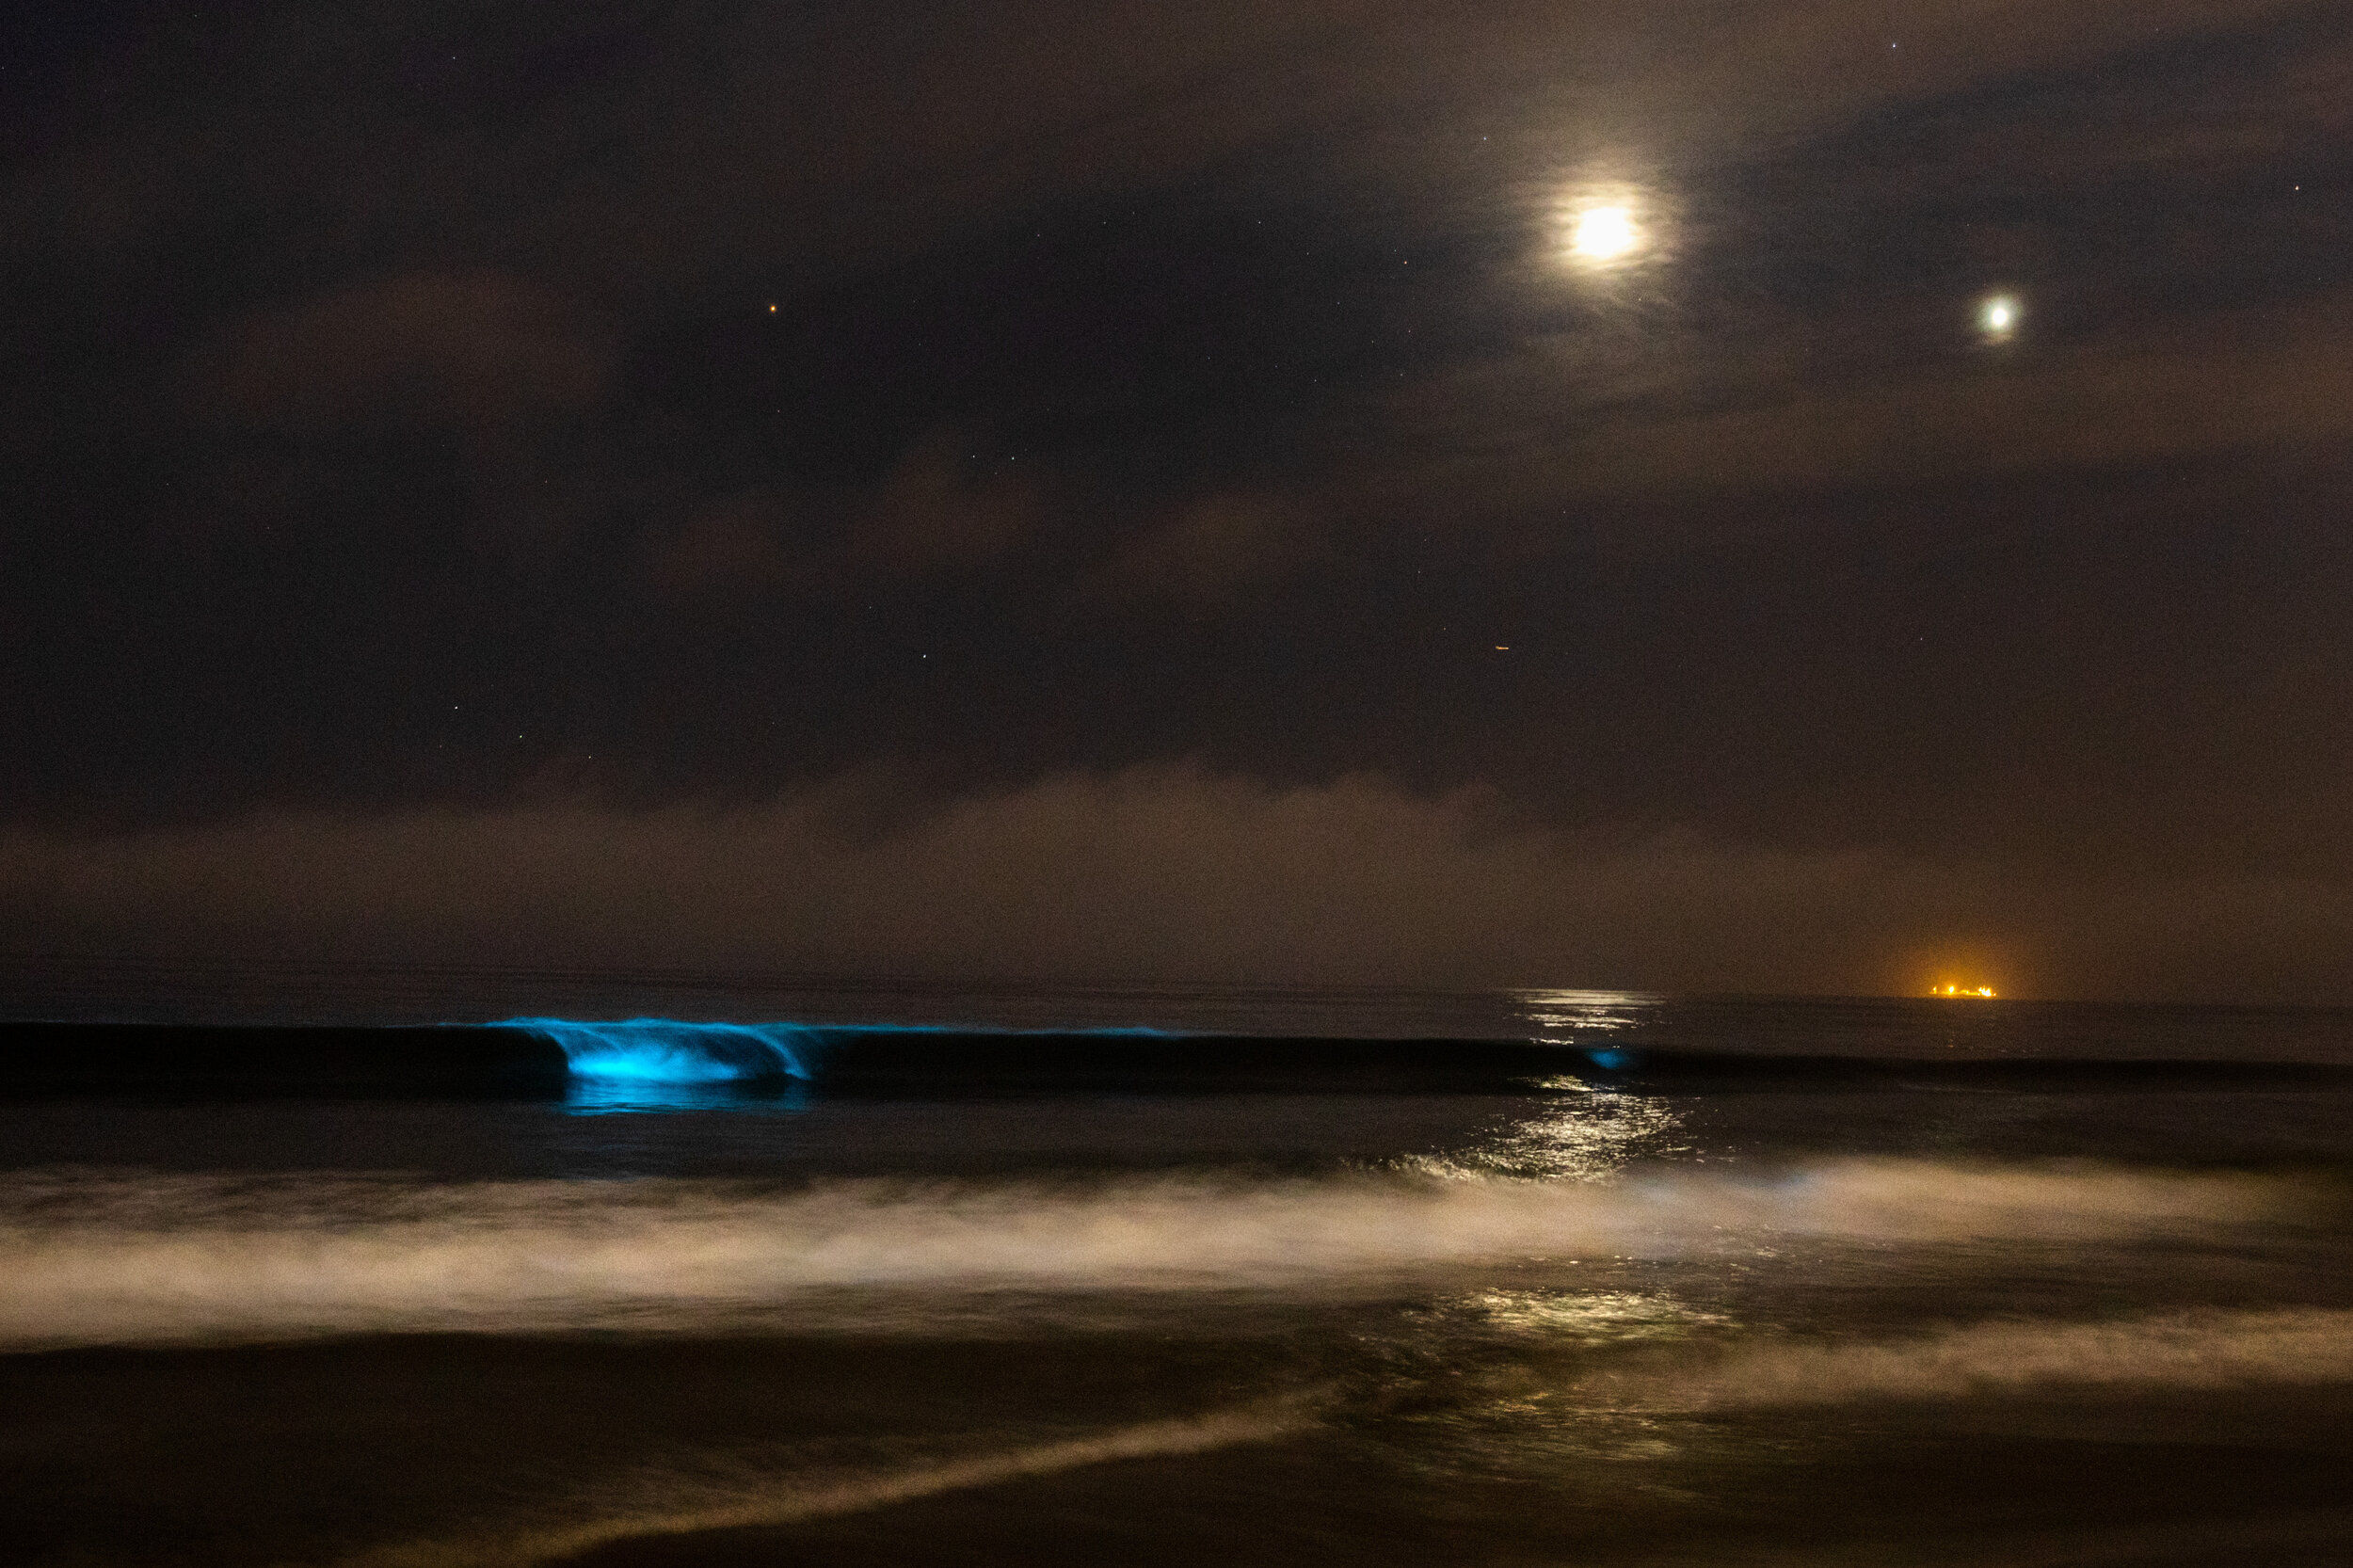  Bioluminescent waves glow off the coast of Hermosa Beach, CA, Sunday, April 26, 2020. The phenomenon is associated with a red tide, or an algae bloom, filled with dinoflagellates which react with bioluminescence when jostled by the moving water. Dur